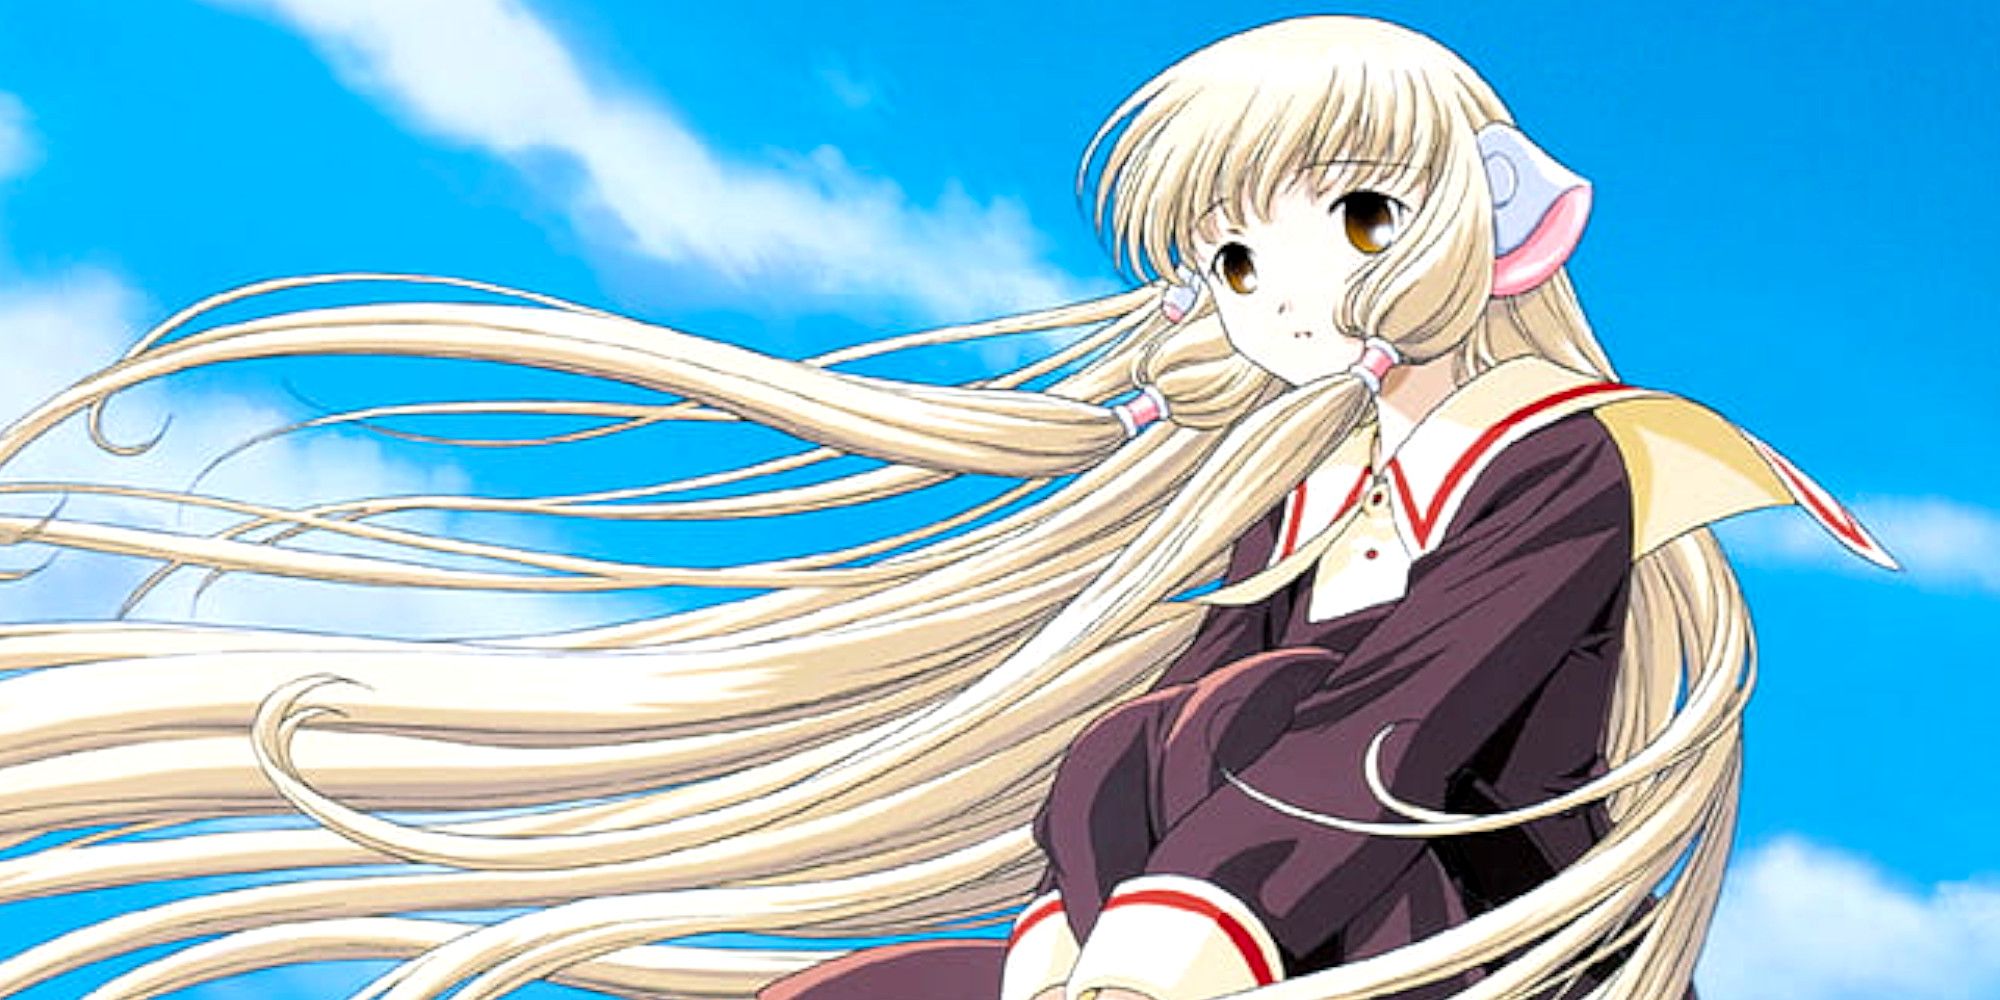 Chobits 2016 Anime Review: A bit surprised - News in Japan